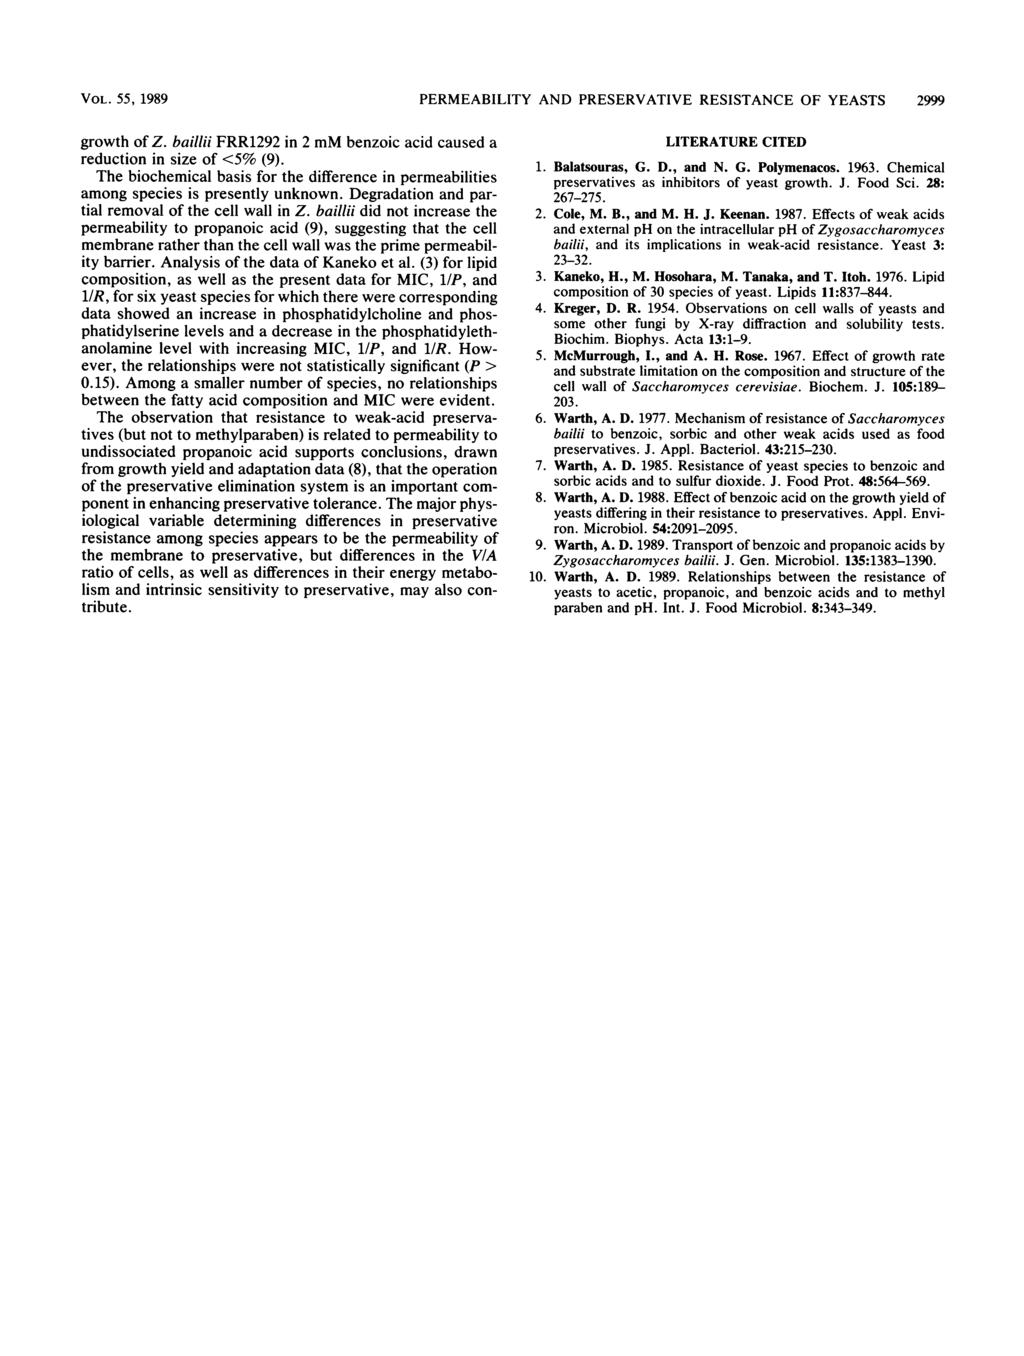 VOL. 55, 1989 PERMEABILITY AND PRESERVATIVE RESISTANCE OF YEASTS 2999 growth of Z. billii FRR1292 in 2 mm benzoic cid cused reduction in size of <5% (9).